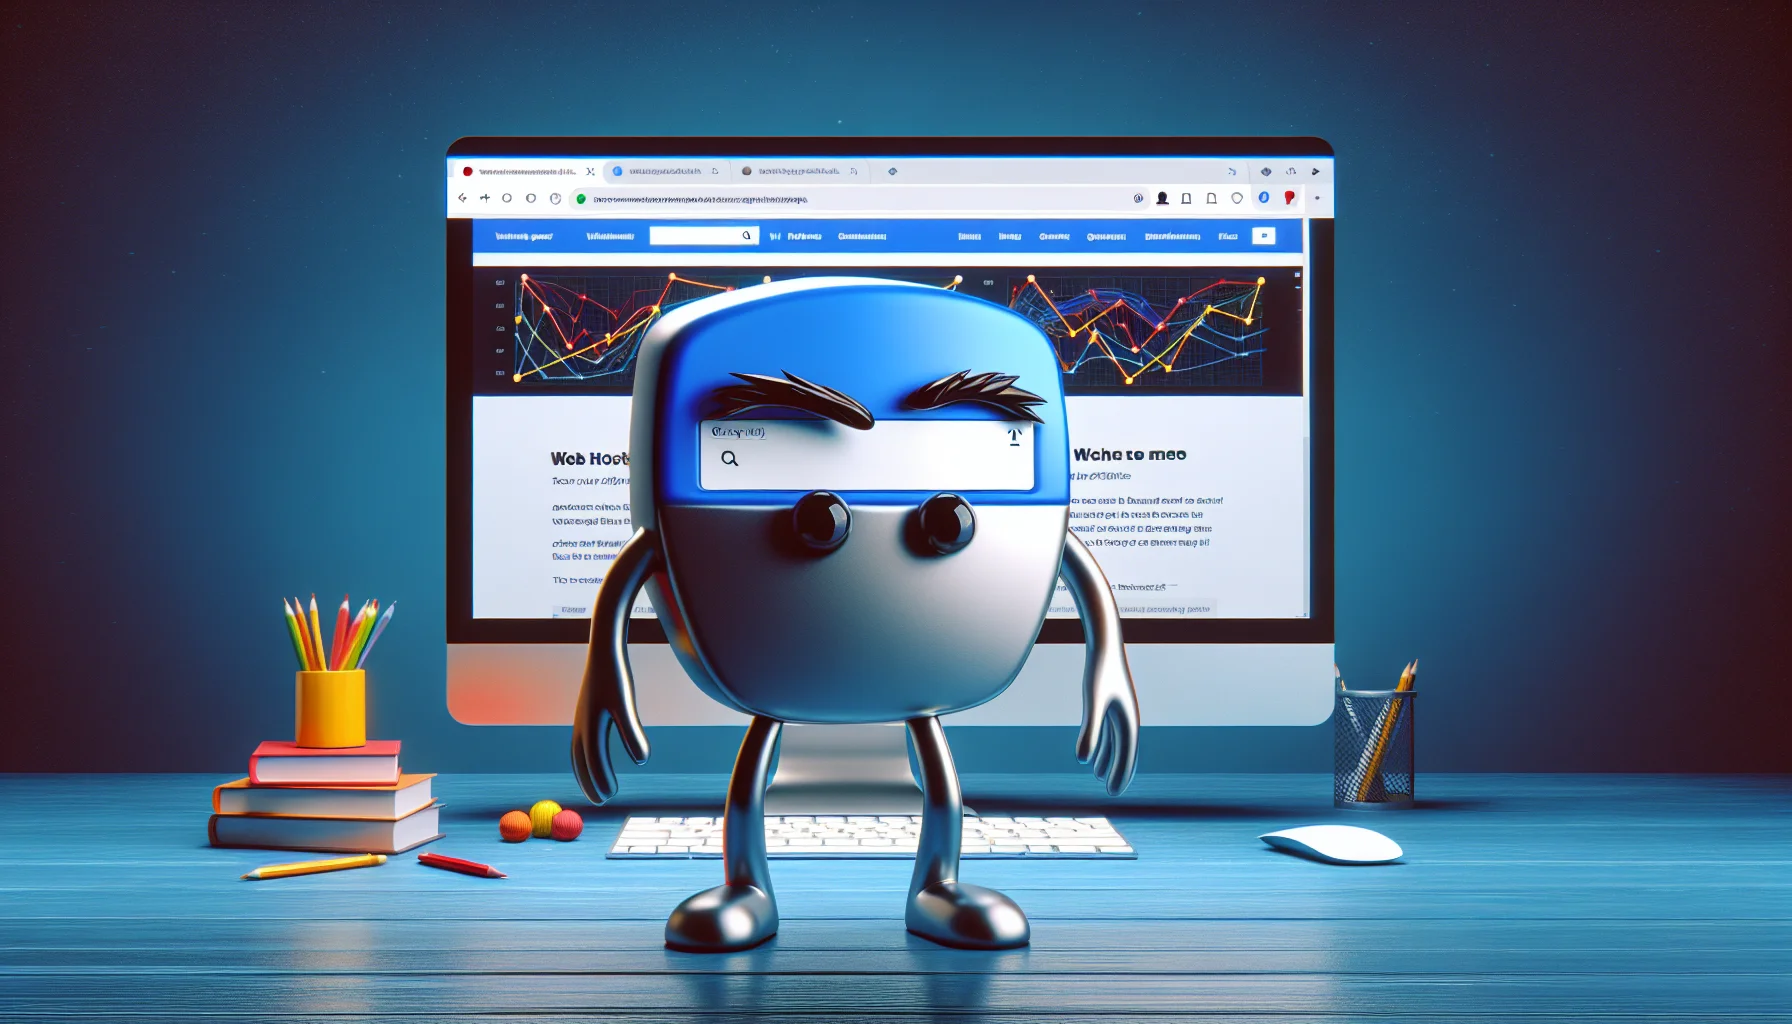 Generate a whimsical image showcasing a web browser icon depicted as an unusually shaped character. This character is standing in front of a computer monitor displaying a website's landing page. The website should be designed to promote web hosting services in an appealing manner, adding funny elements such as quirky graphs, quirky taglines, and unexpected, humorous pop-ups. The composition should question the ordinary perception we have of web browsers, adding a comedic twist to the standard practices of web hosting services.